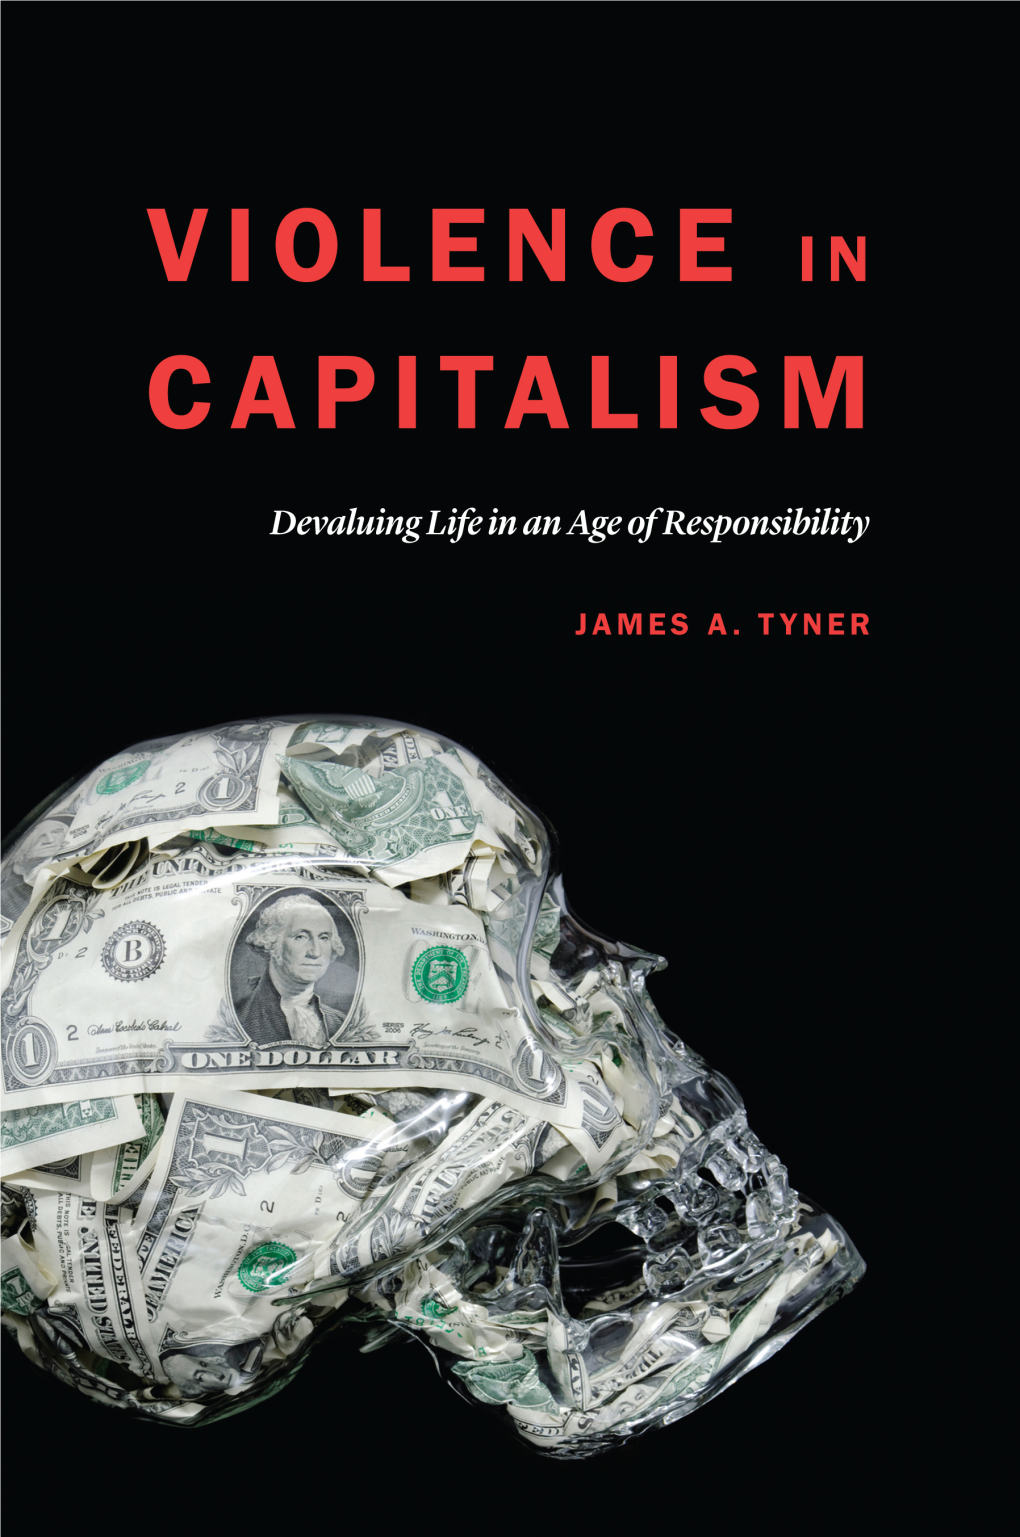 Violence in Capitalism: Devaluing Life in an Age of Responsibility / James A